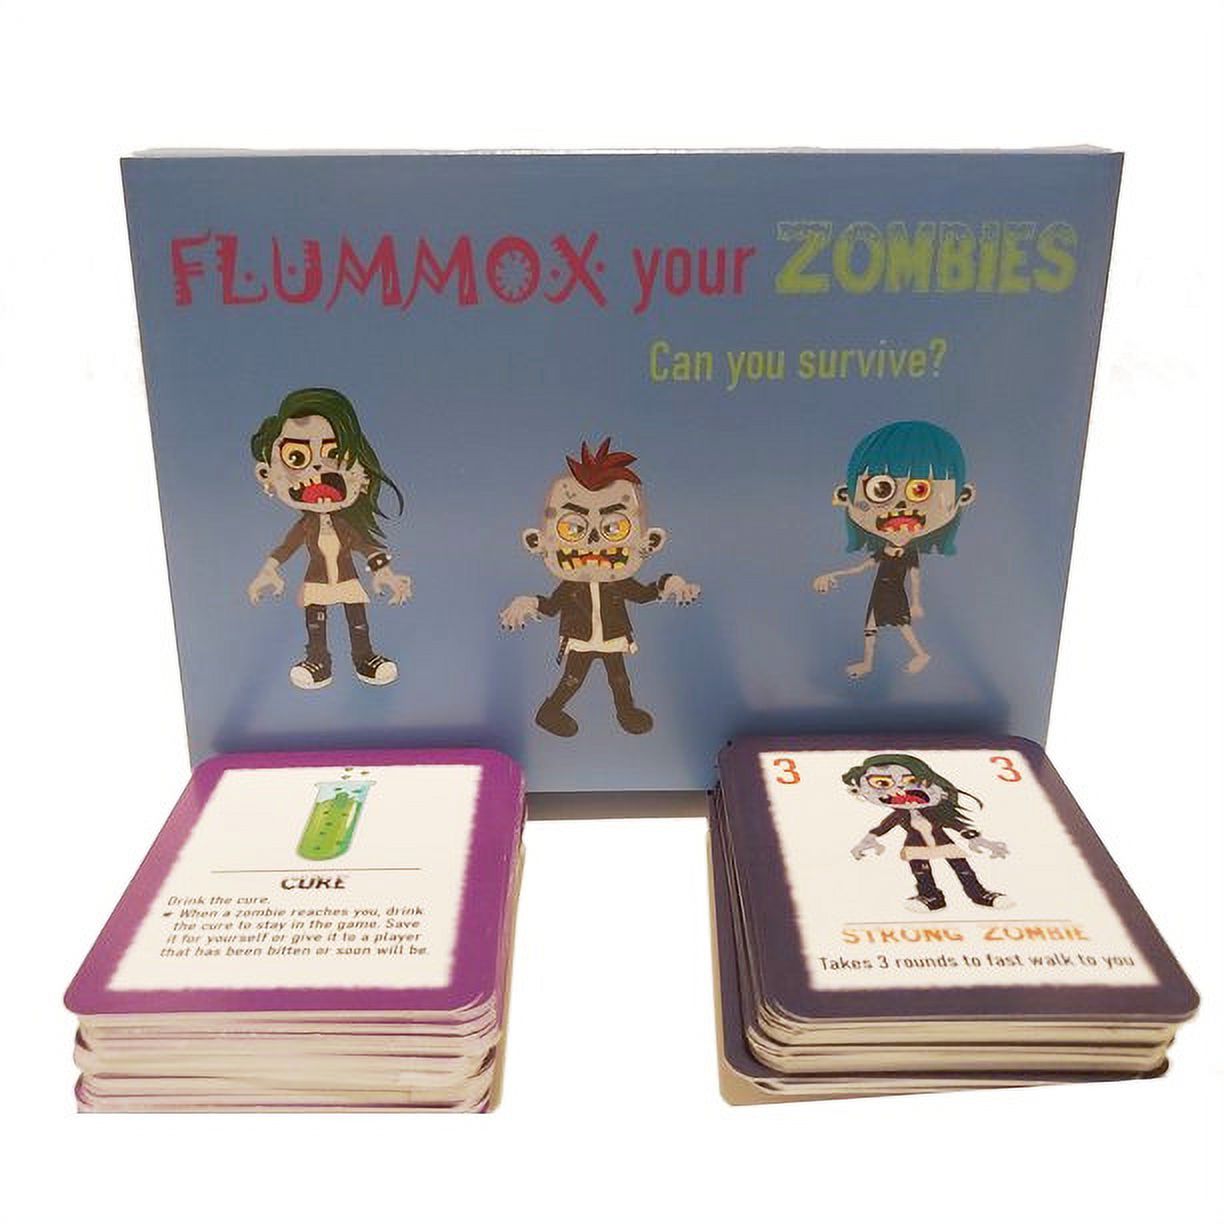 Flummox your Zombies - image 4 of 5